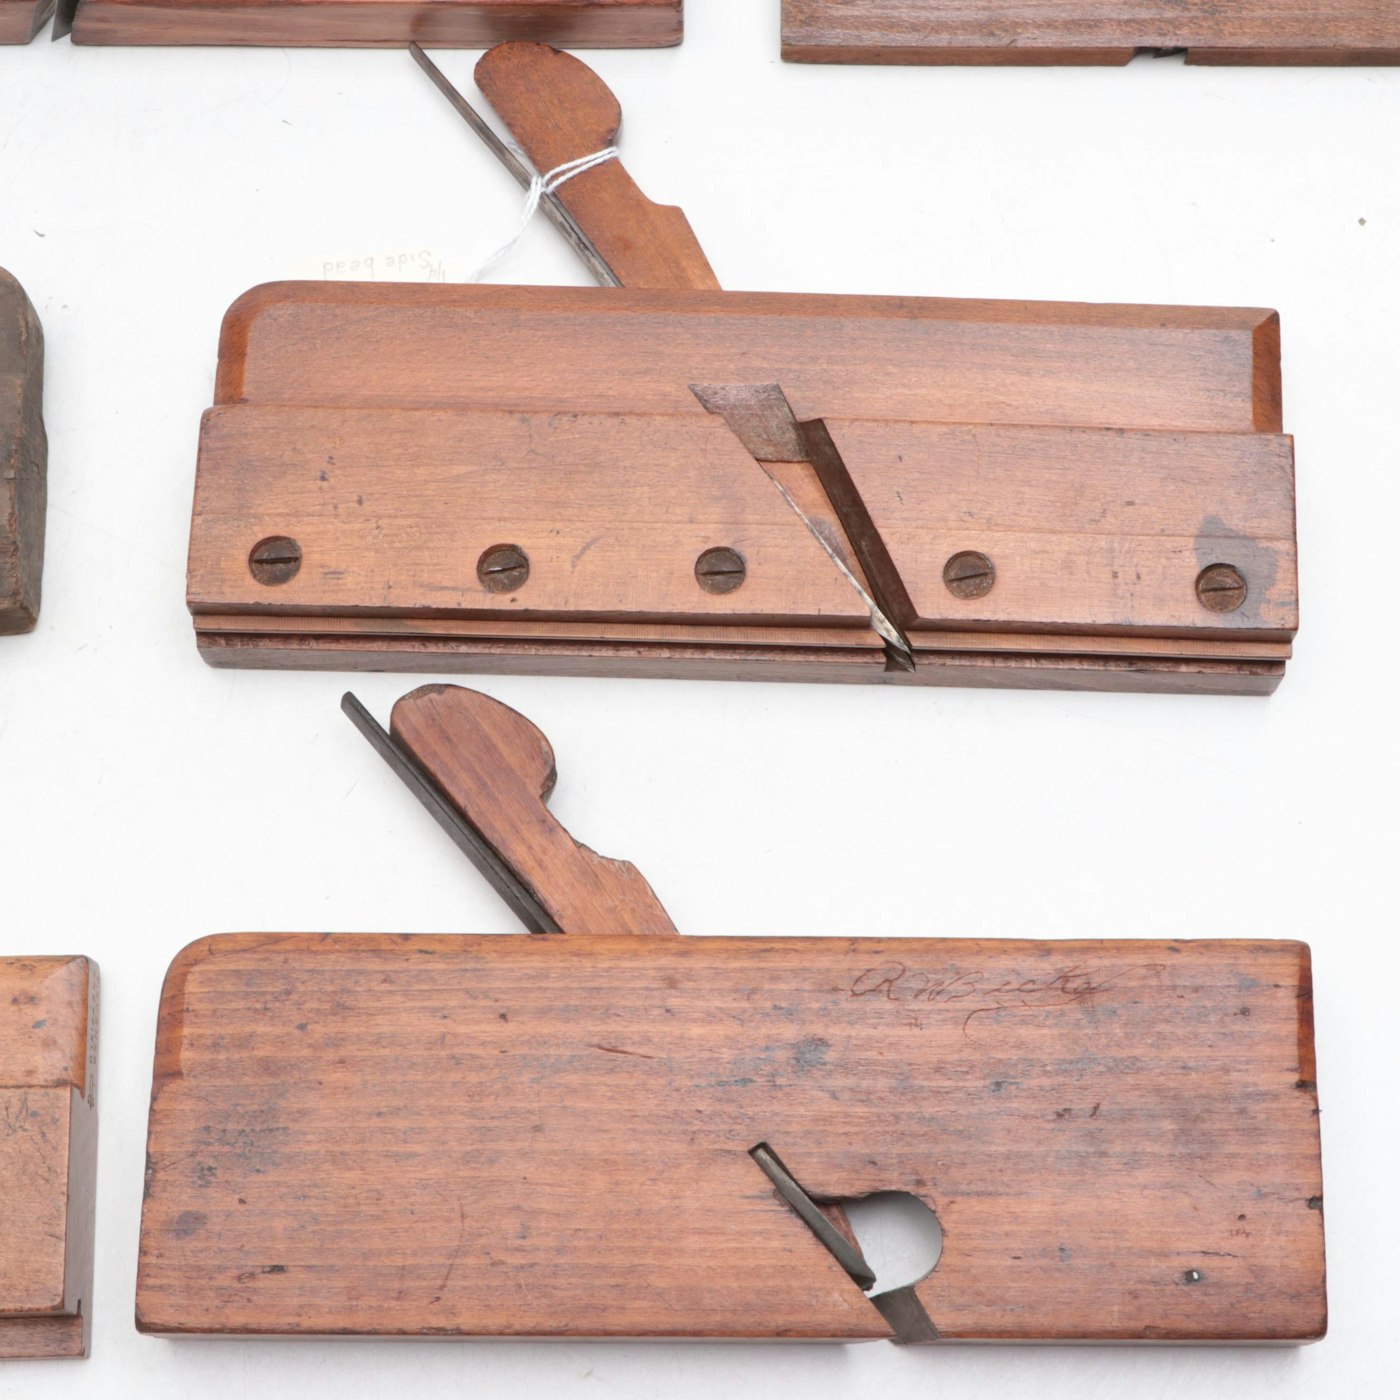 atkins-sons-ohio-tool-company-and-more-wooden-rebate-planes-ebth